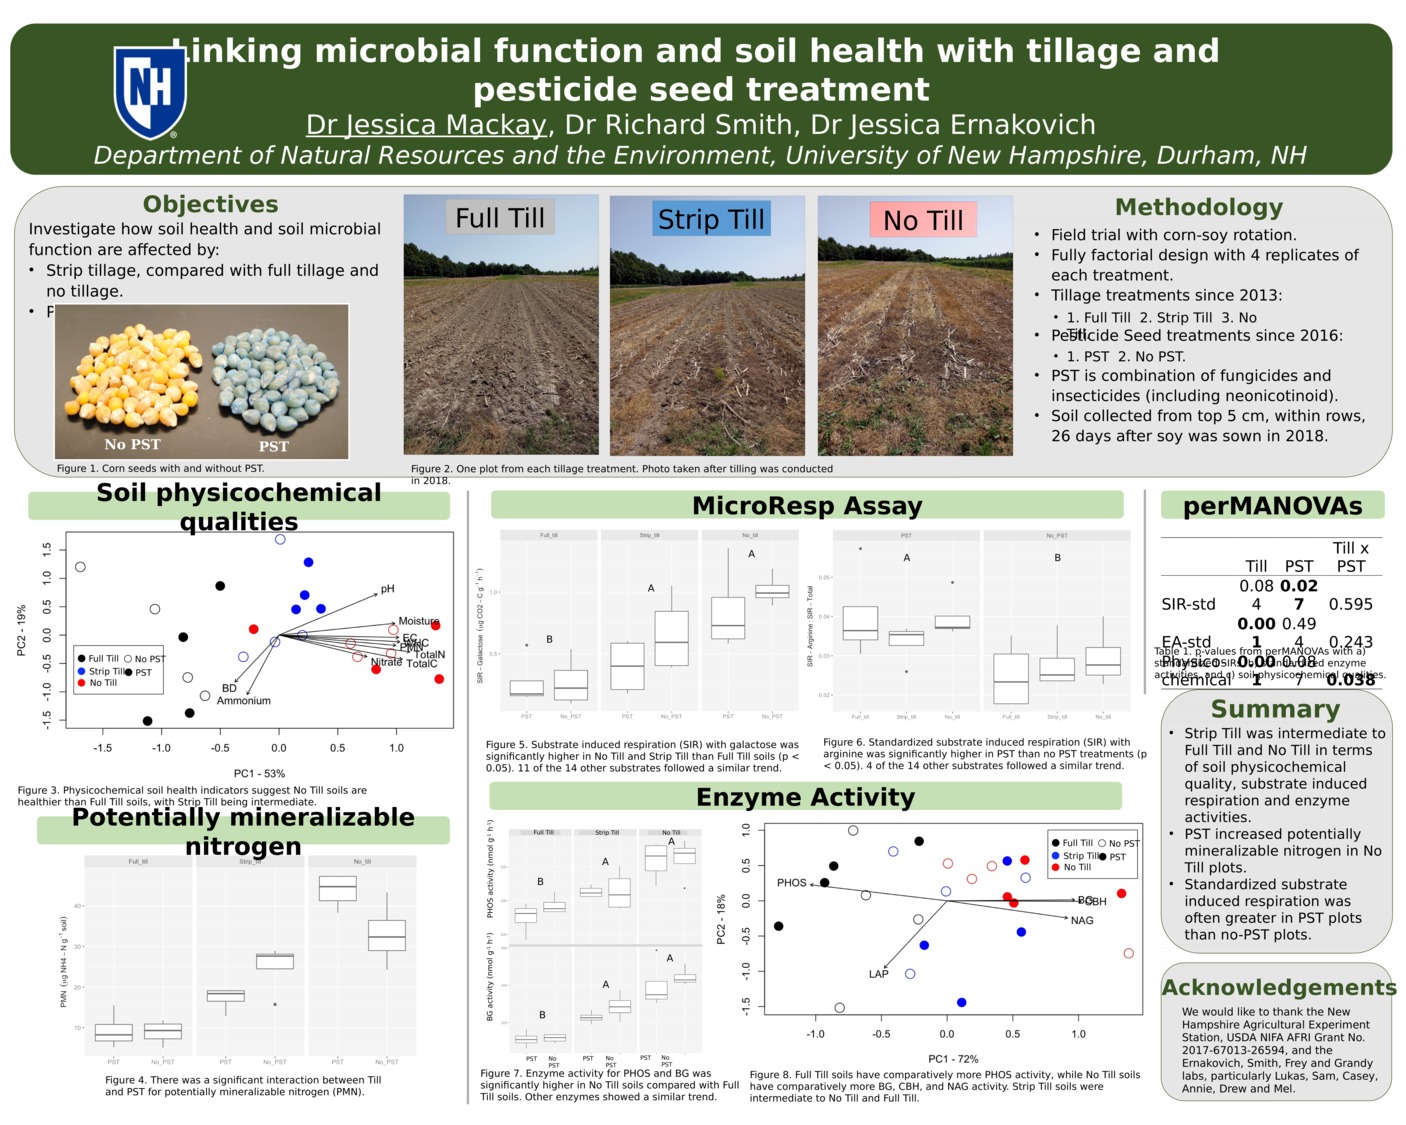 Linking Microbial Function And Soil Health With Tillage And Pesticide Seed Treatment by jem1101